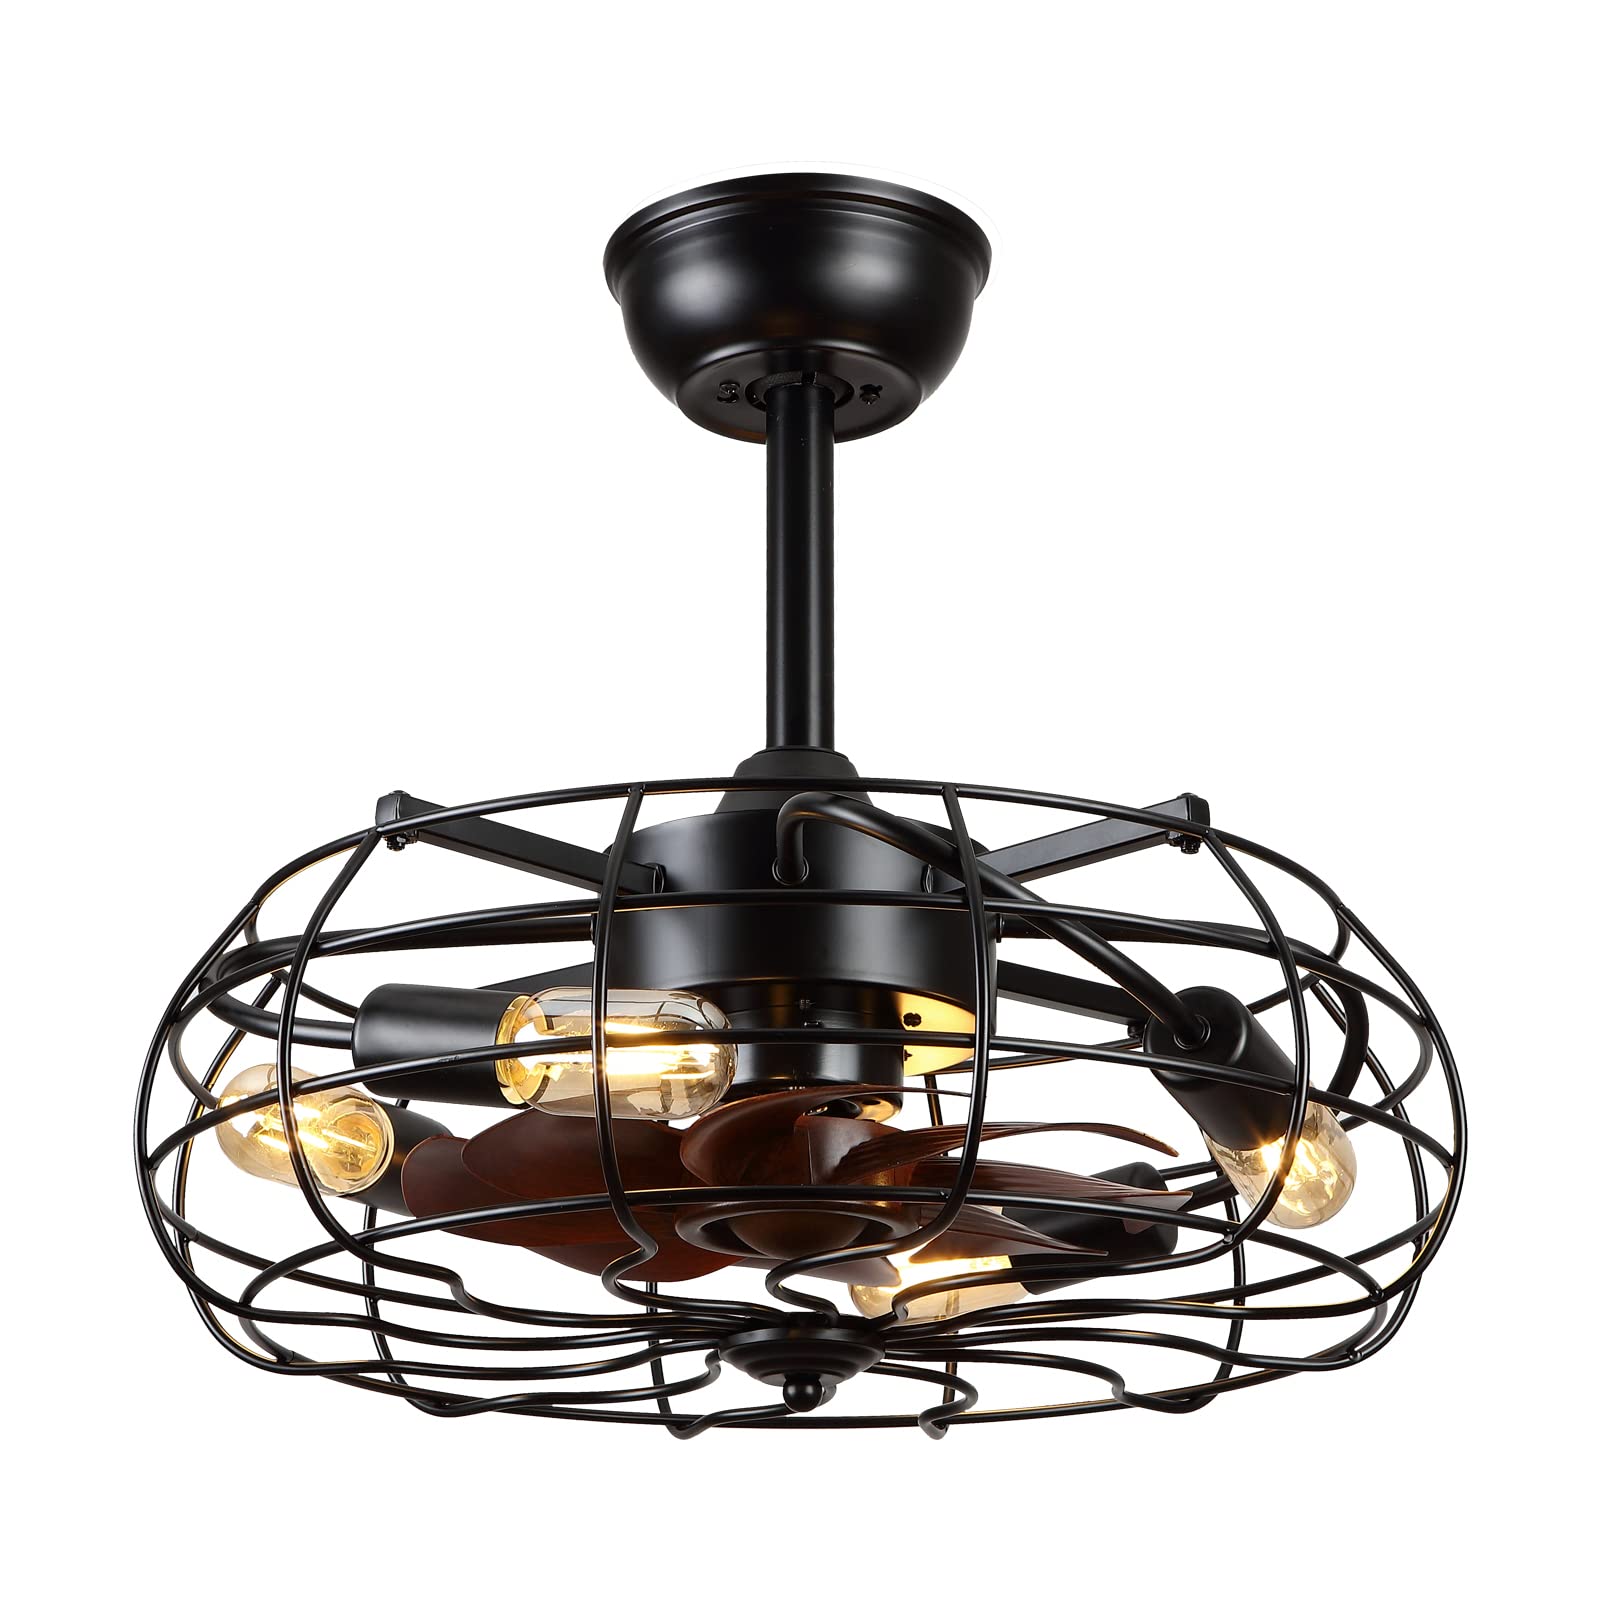 Asyko Caged Ceiling Fans with Lights